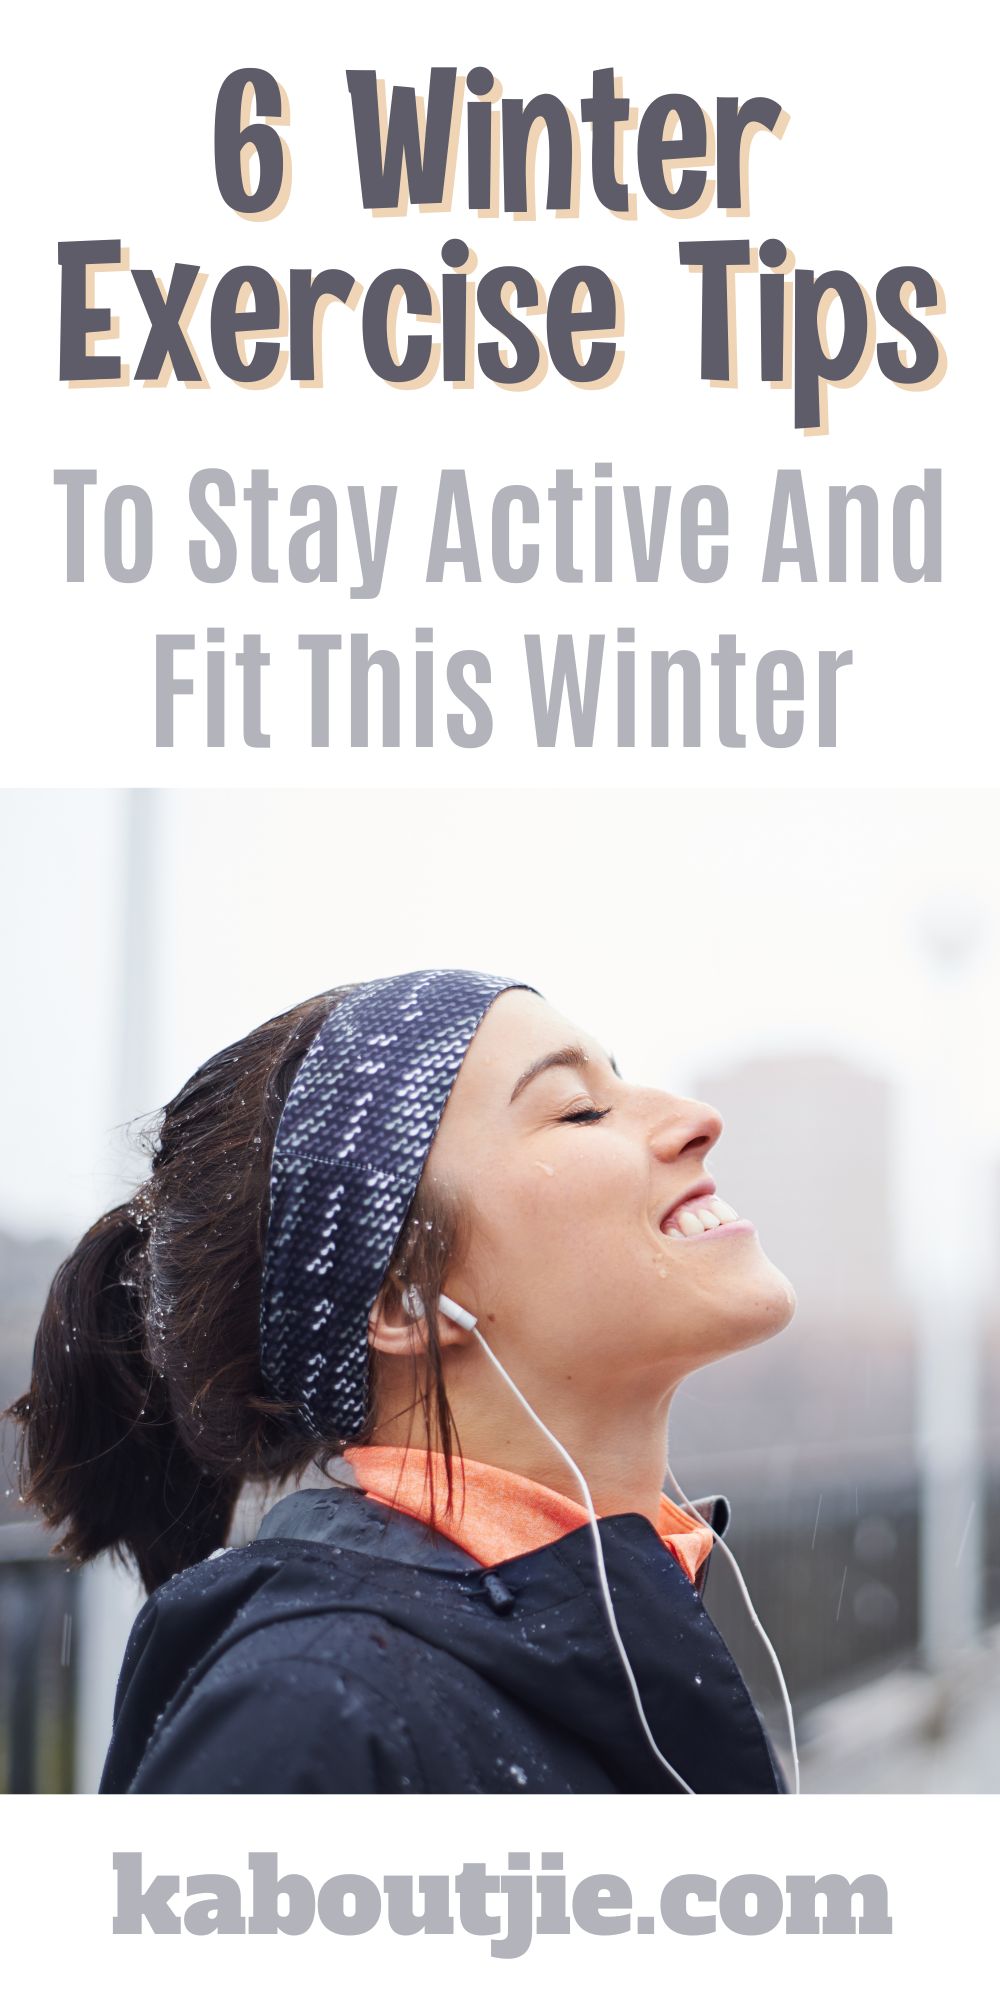 6 Winter Exercise Tips